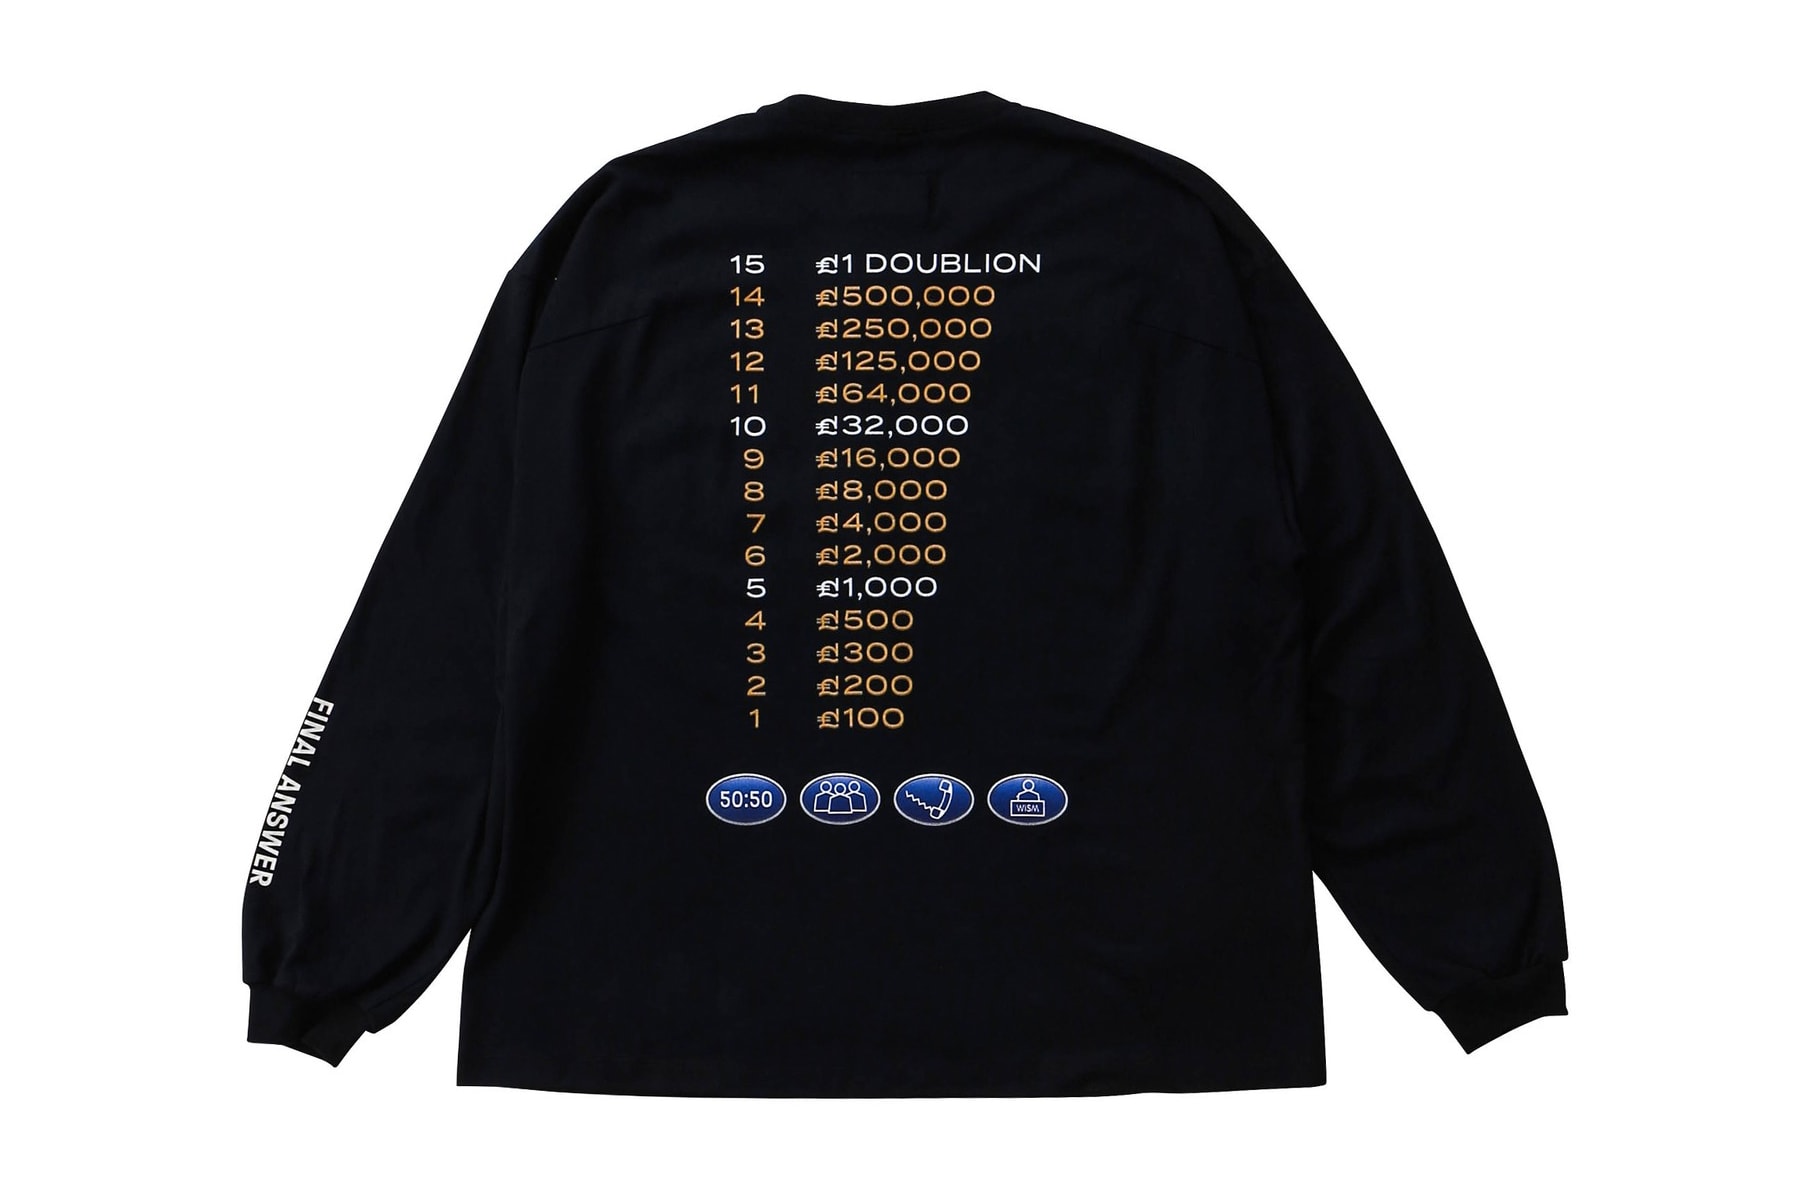 Doublet WISM Graphic Long Sleeves Collaboration who wants to be a millionaire tv show graphics lvmh streetwear japan tokyo pink teal black white purple